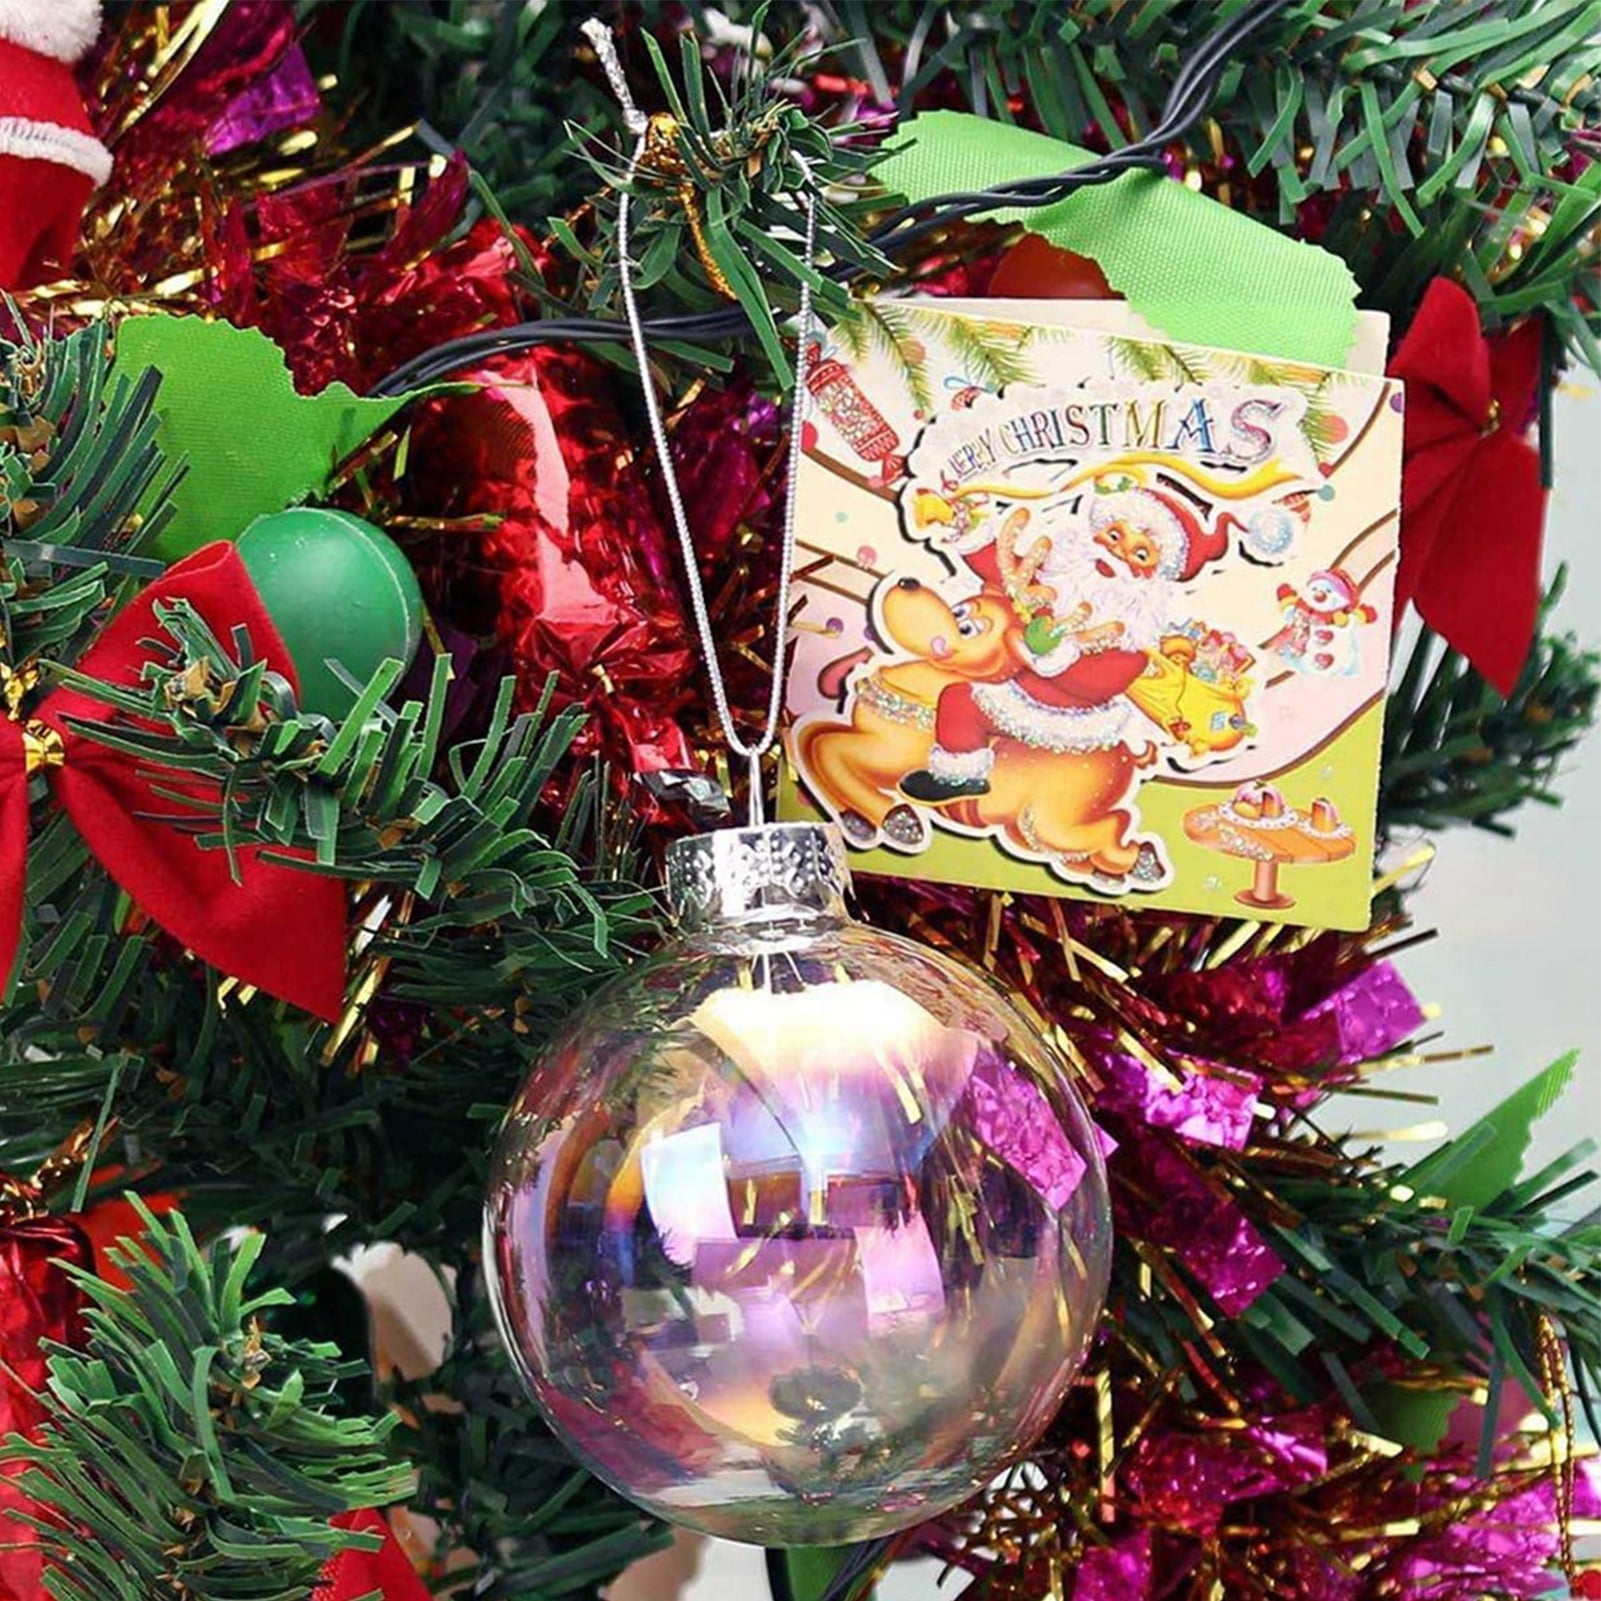 8cm Plastic Christmas Ball Ornament w/ Red String (Clear) (SDC8-RD) D-7